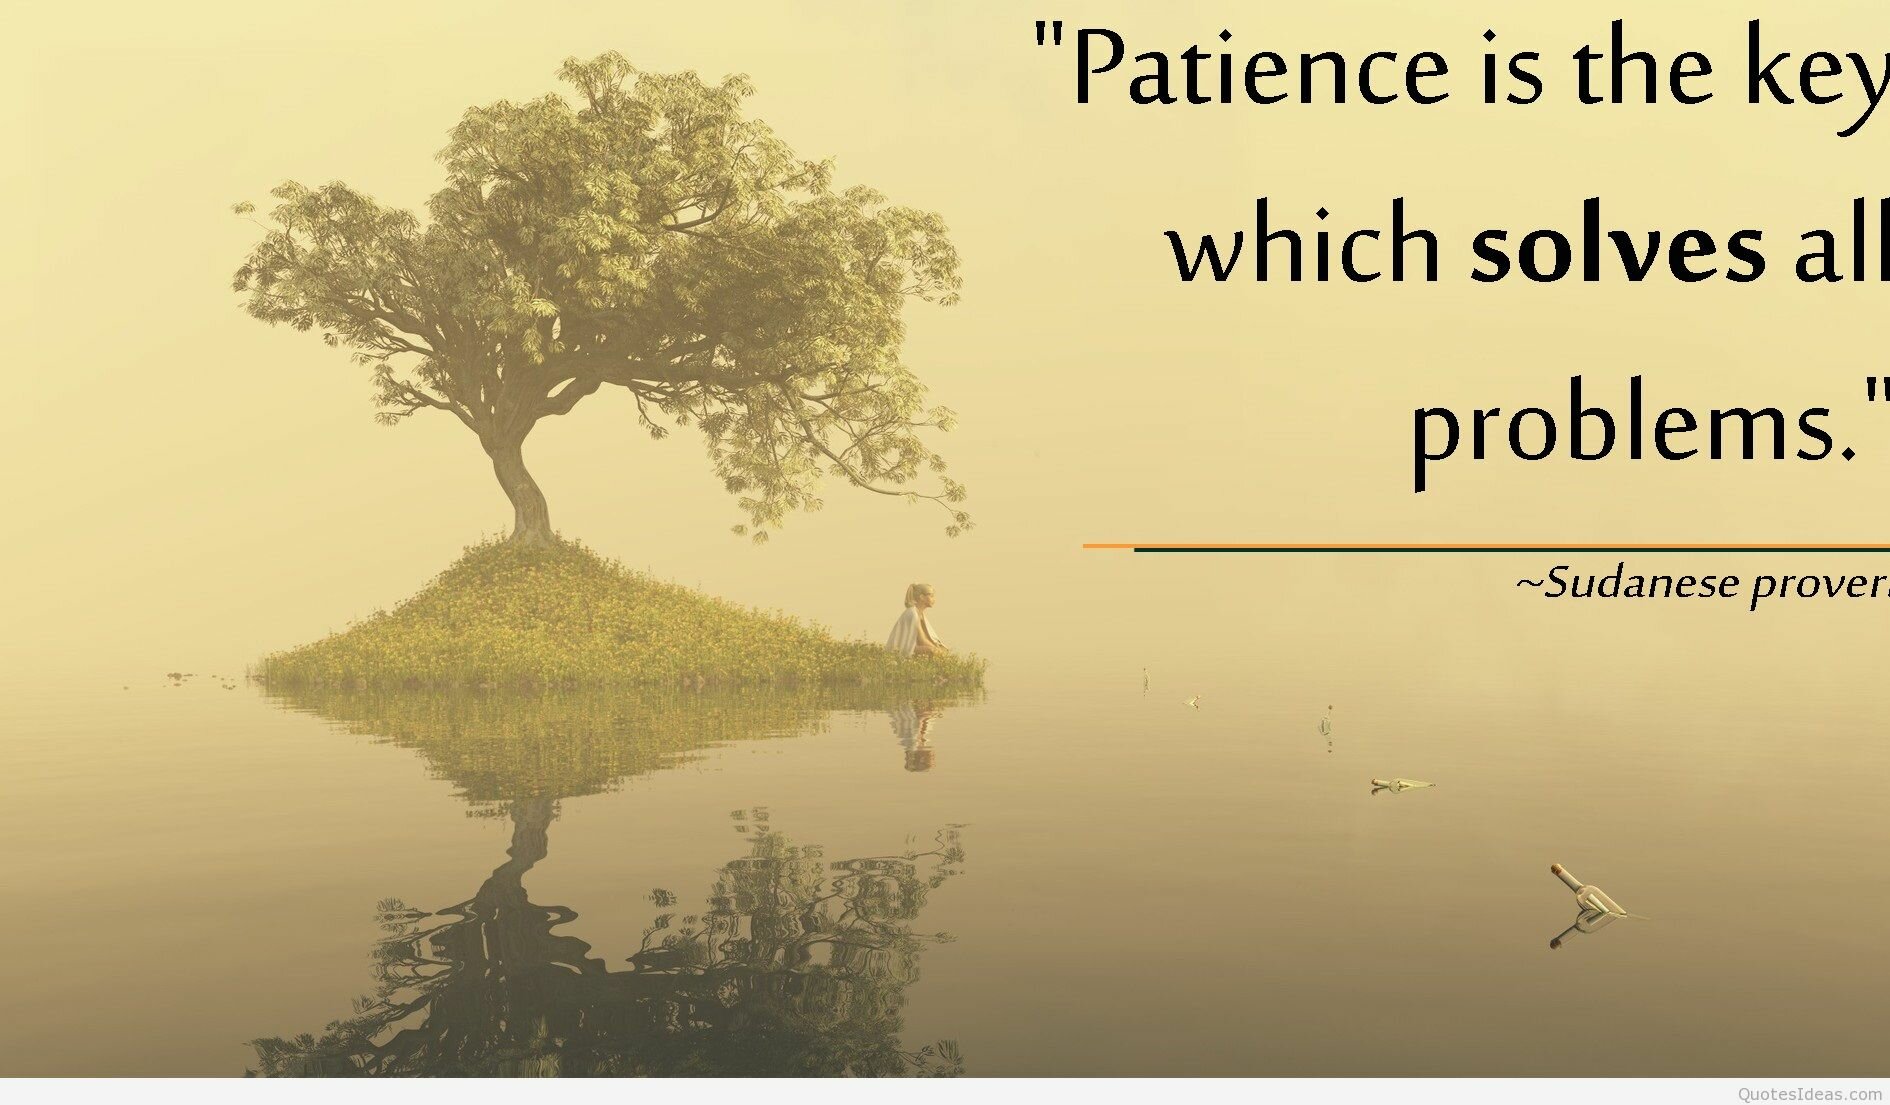 Patience is the key of all problems